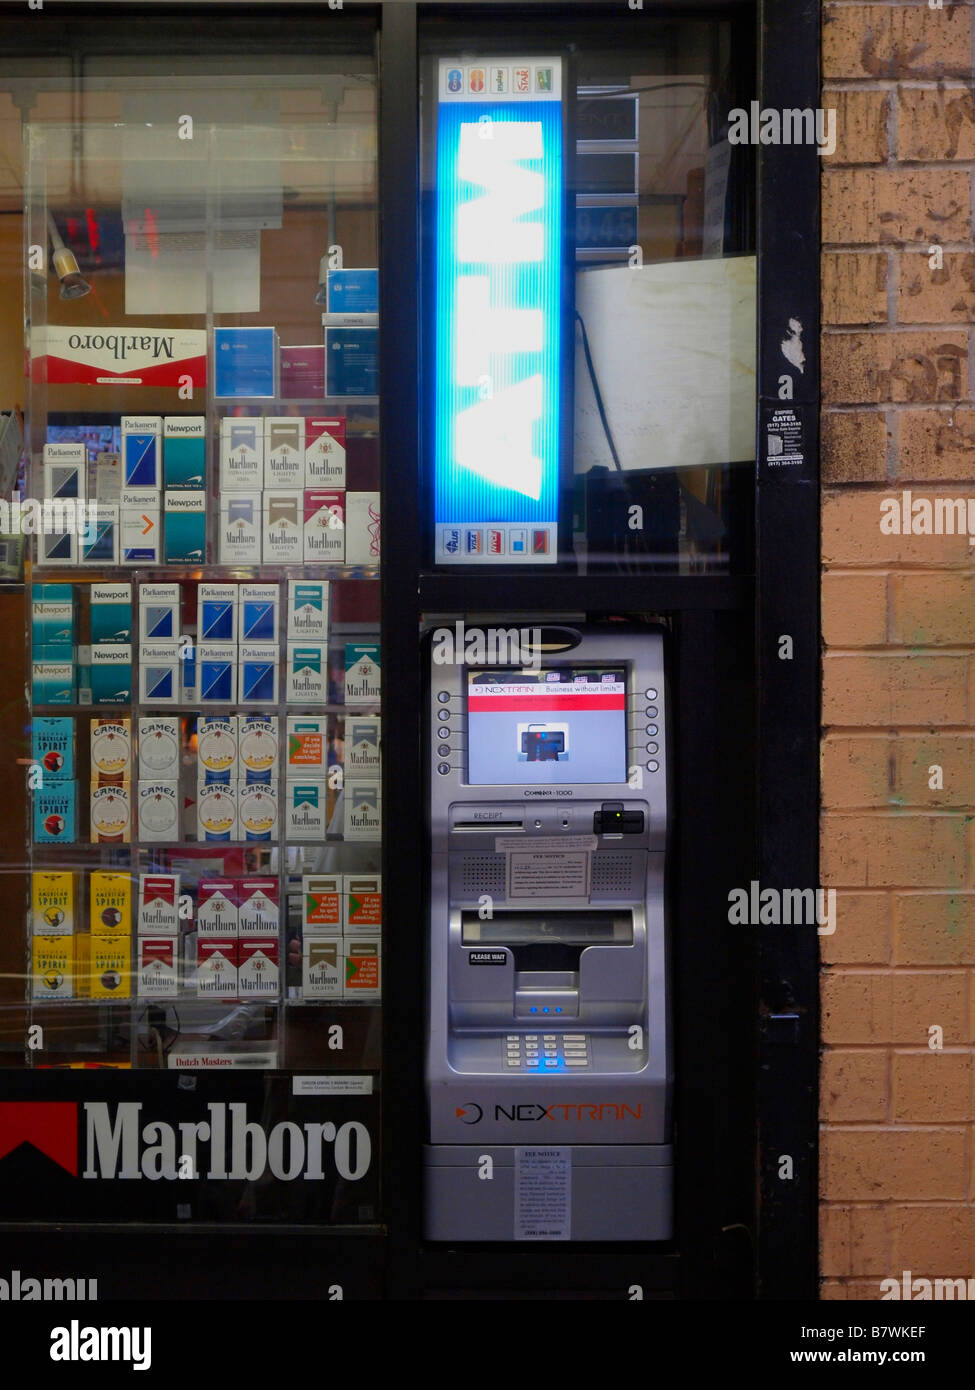 An outdoor automatic teller machine beneath a lighted 'ATM' sign next to a window display full of cigarettes in New York City. Stock Photo